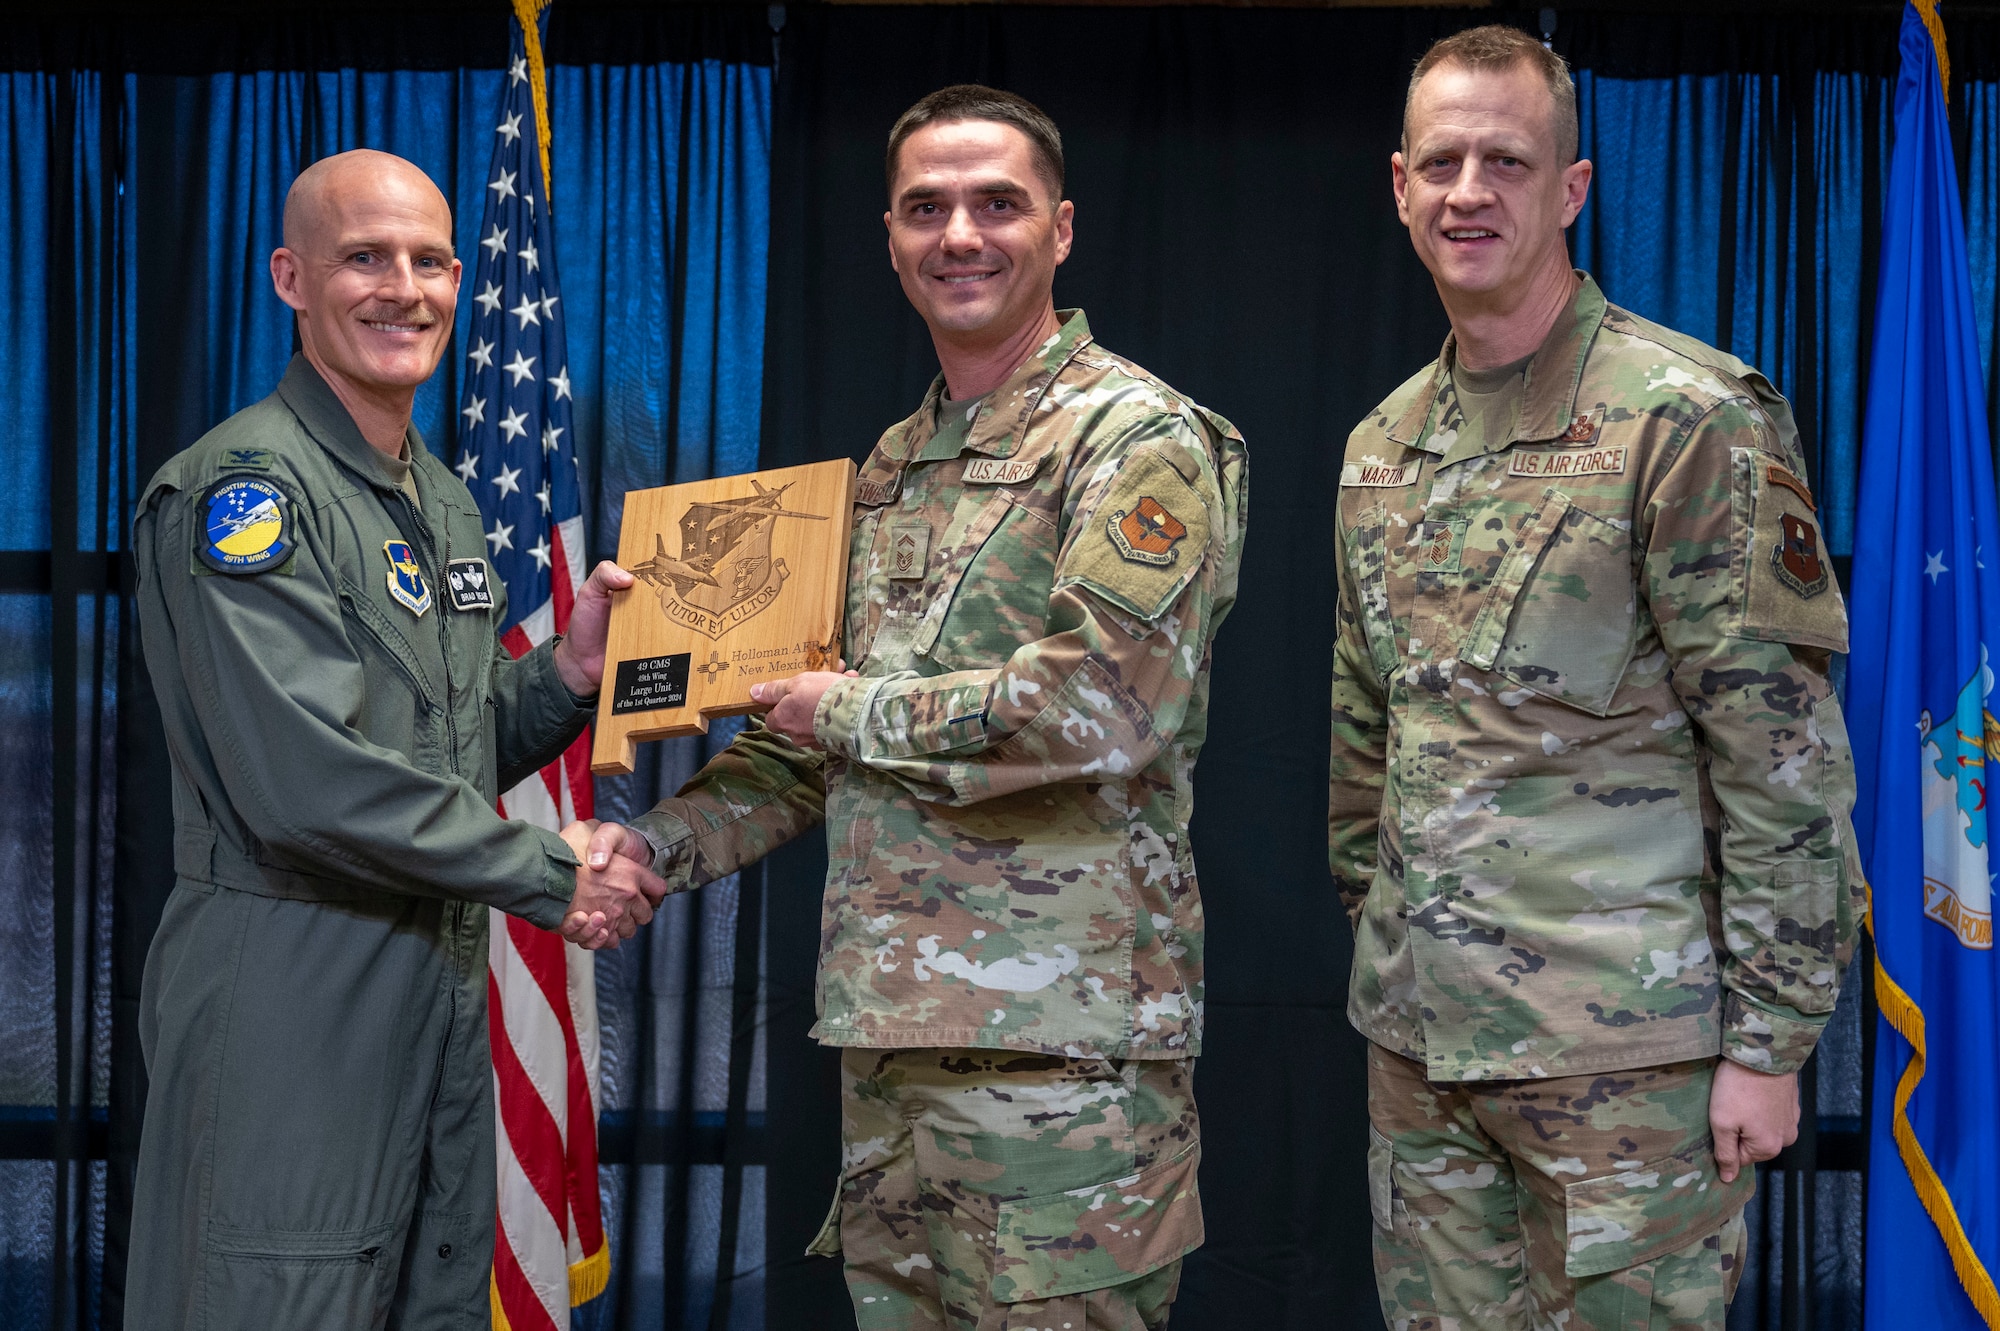 U.S. Air Force Senior Master Sgt. Troy Swenson, from the 49th Component Maintenance Squadron, accepts the 49th Wing’s Large Unit of the Quarter Award, during the 49th Wing’s 1st Quarter Award ceremony at Holloman Air Force Base, New Mexico, May 3, 2024. Quarterly award winners were selected based on their technical expertise, demonstration of leadership and job performance. (U.S. Air Force photo by Airman 1st Class Michelle Ferrari)